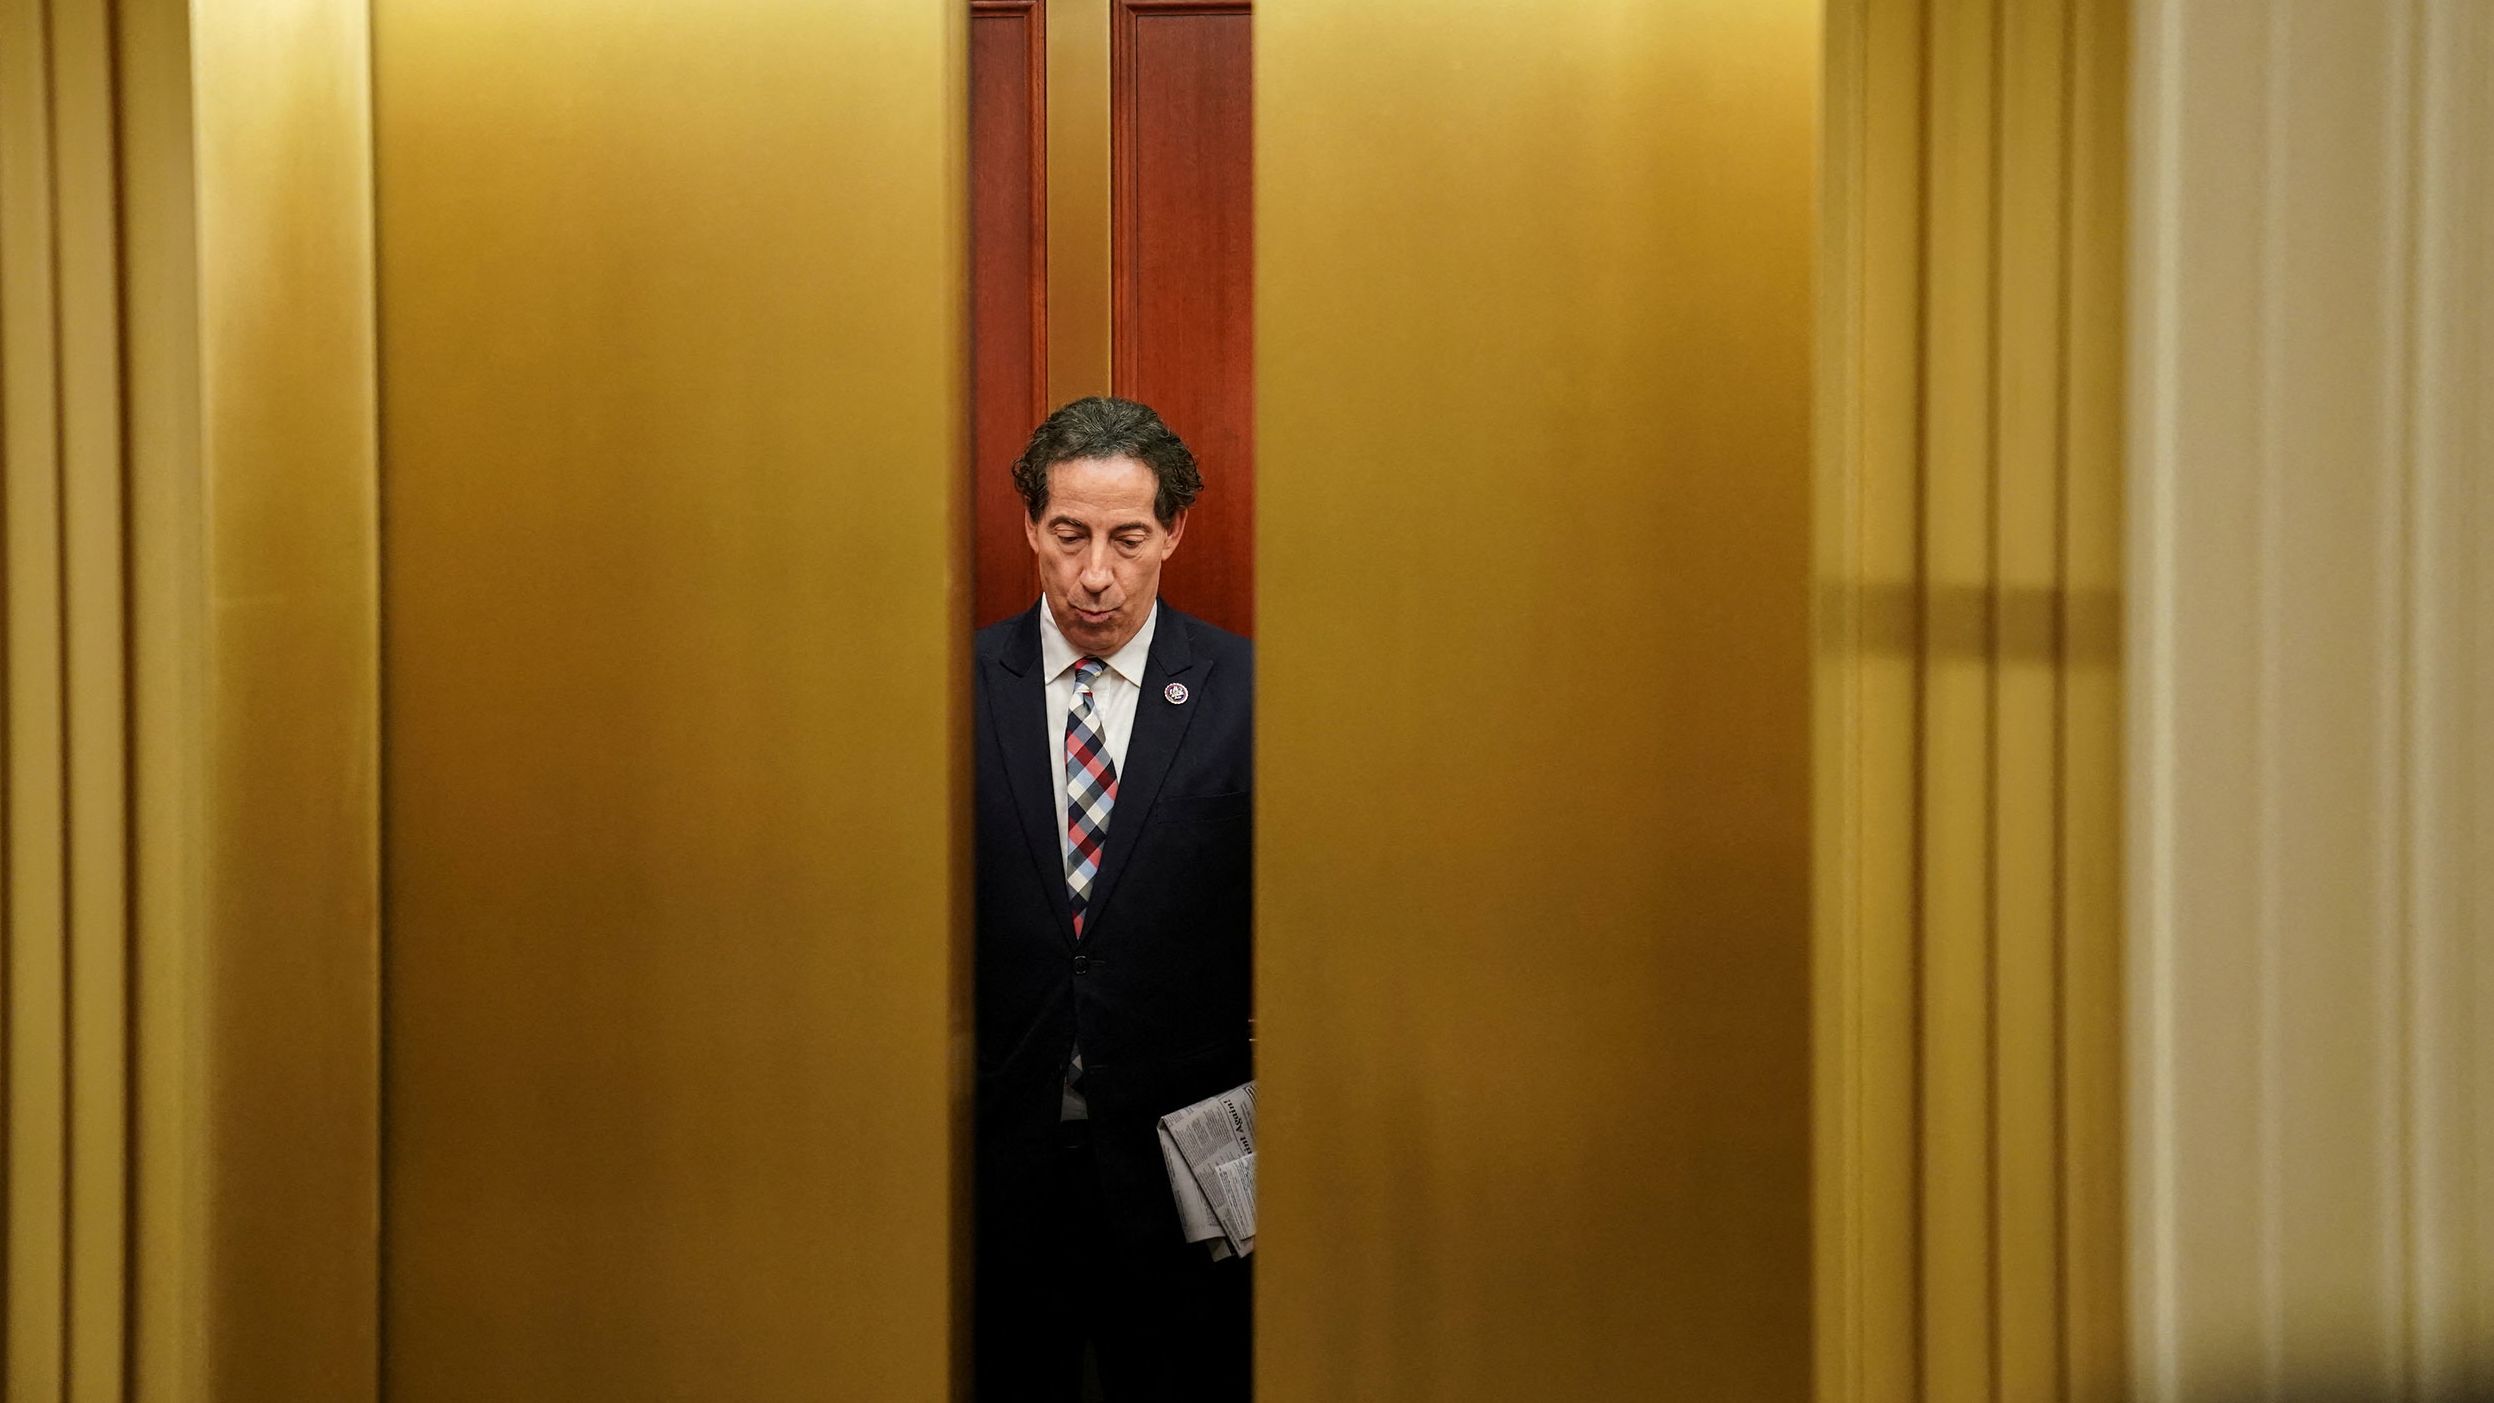 US Rep. Jamie Raskin, one of the committee members, rides in an elevator before the hearing on July 21.